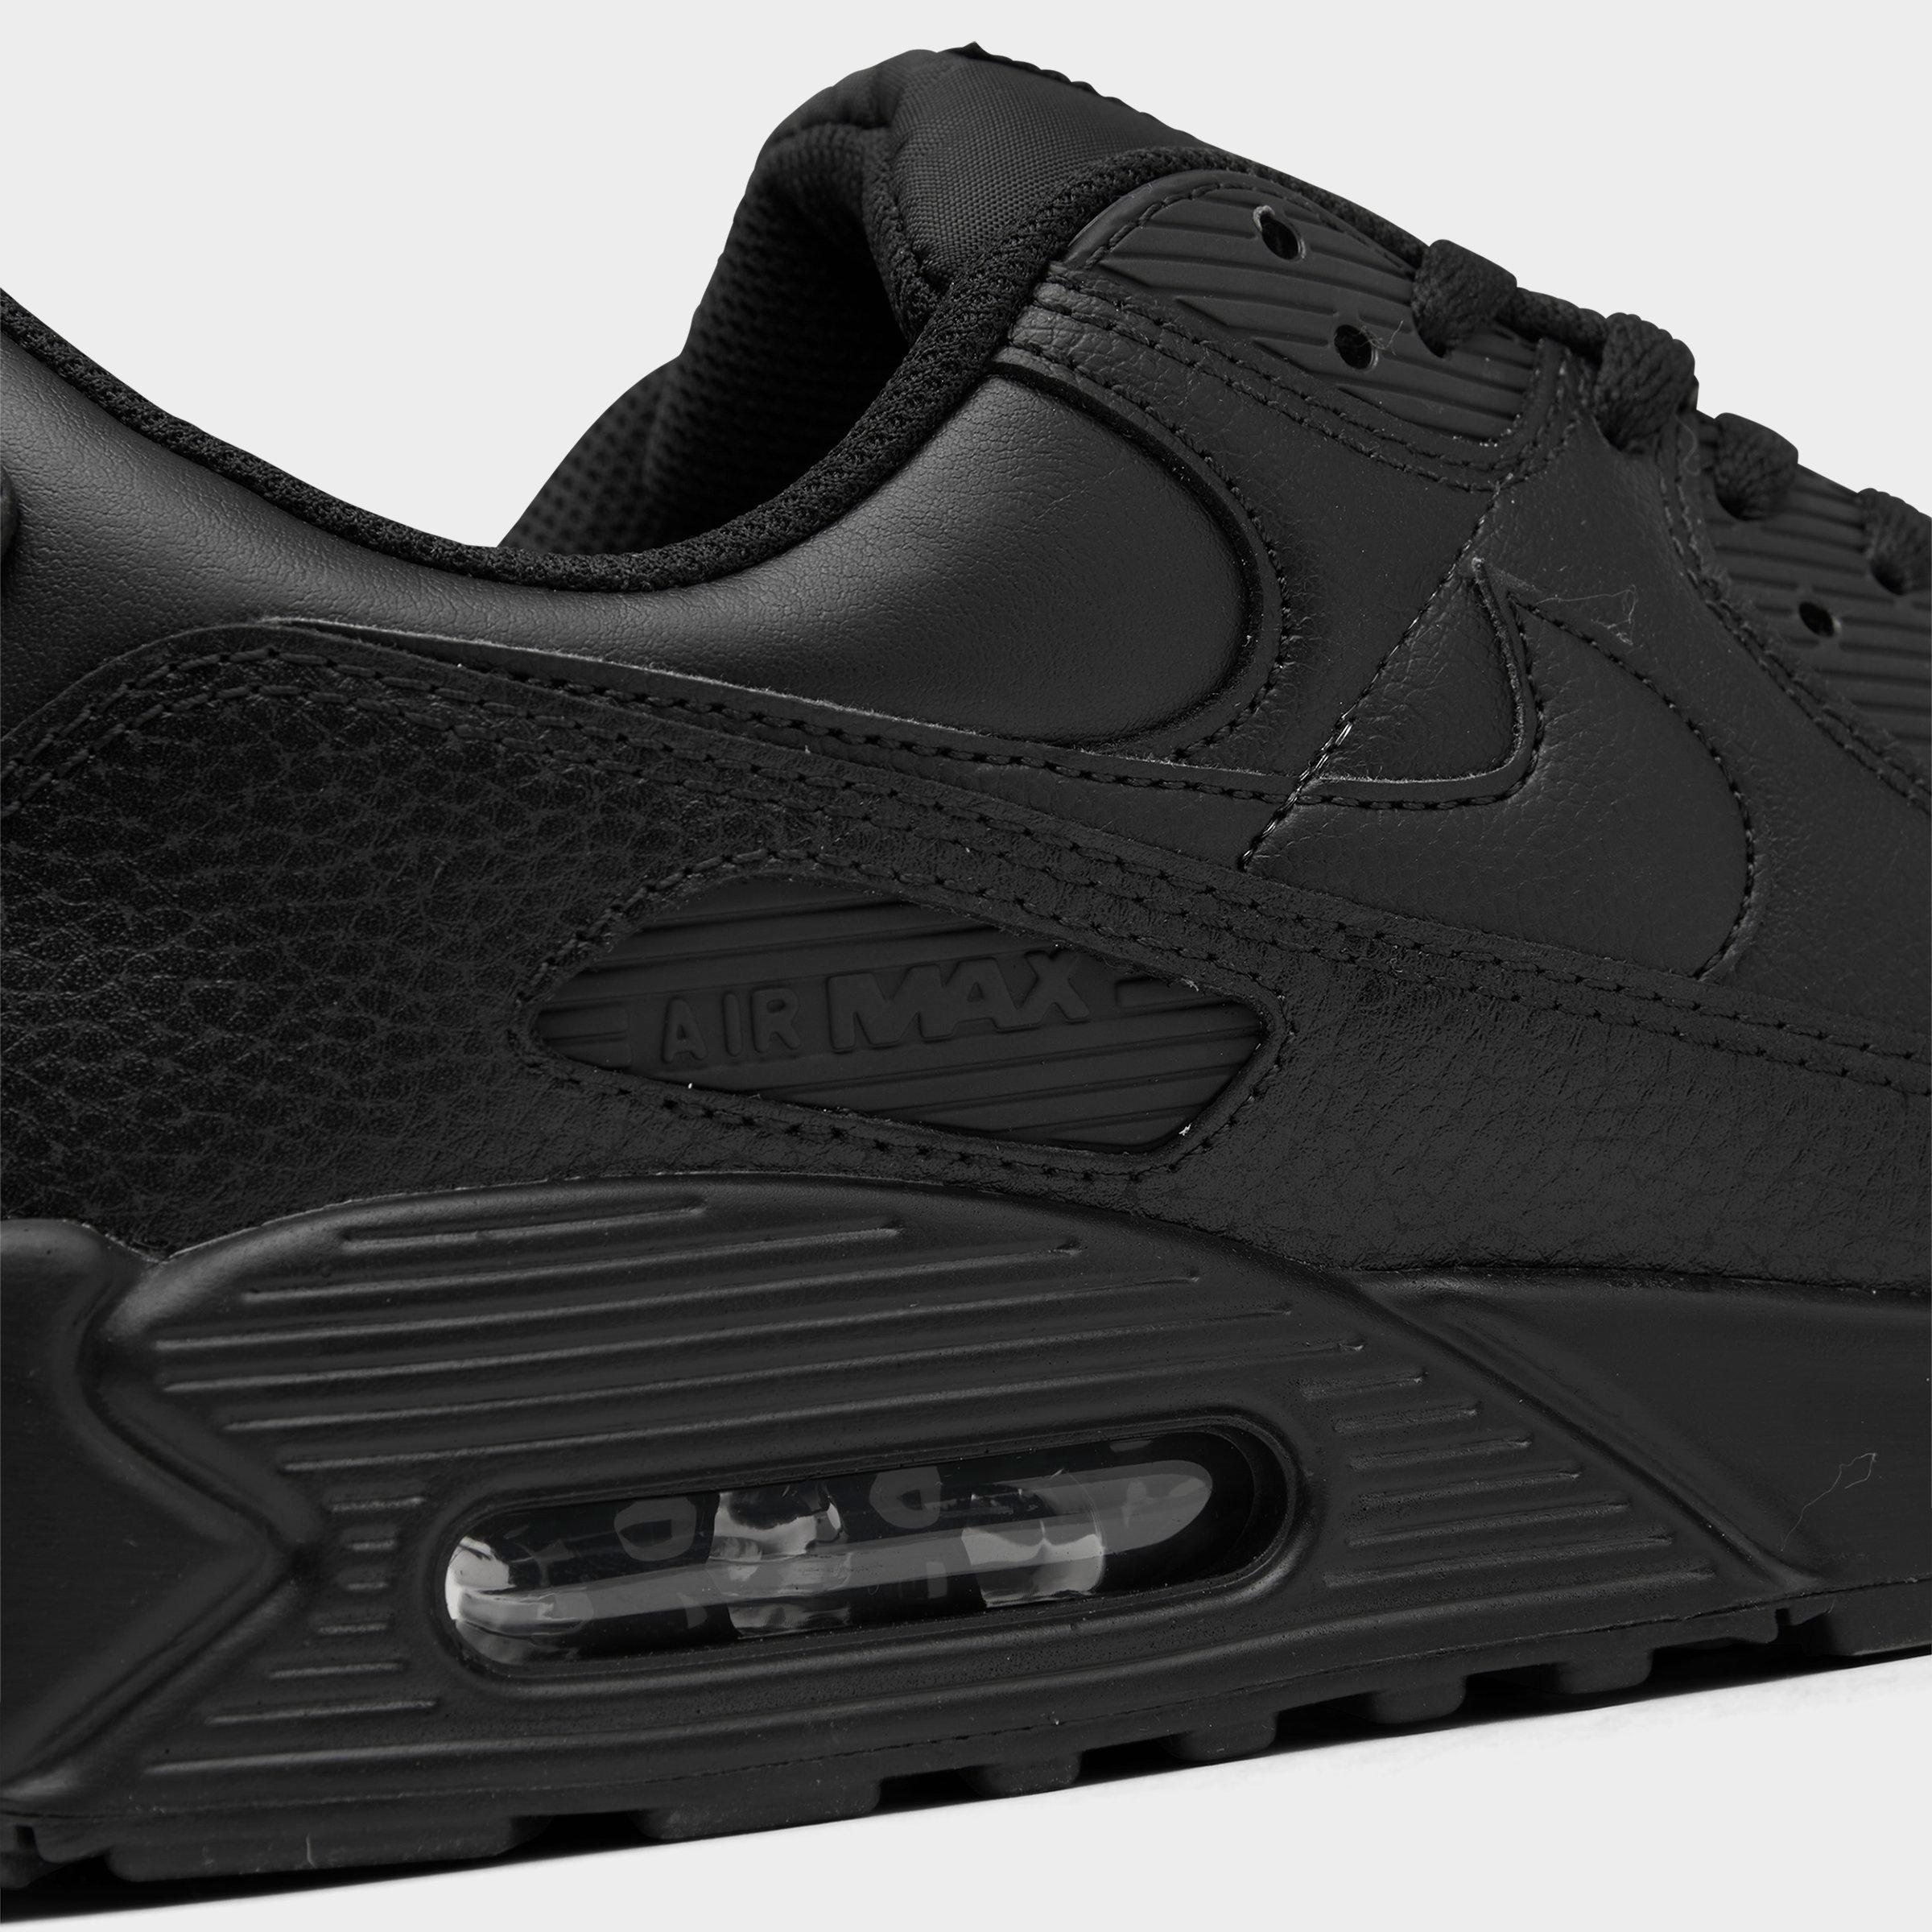 air max 90 leather black men's casual shoe